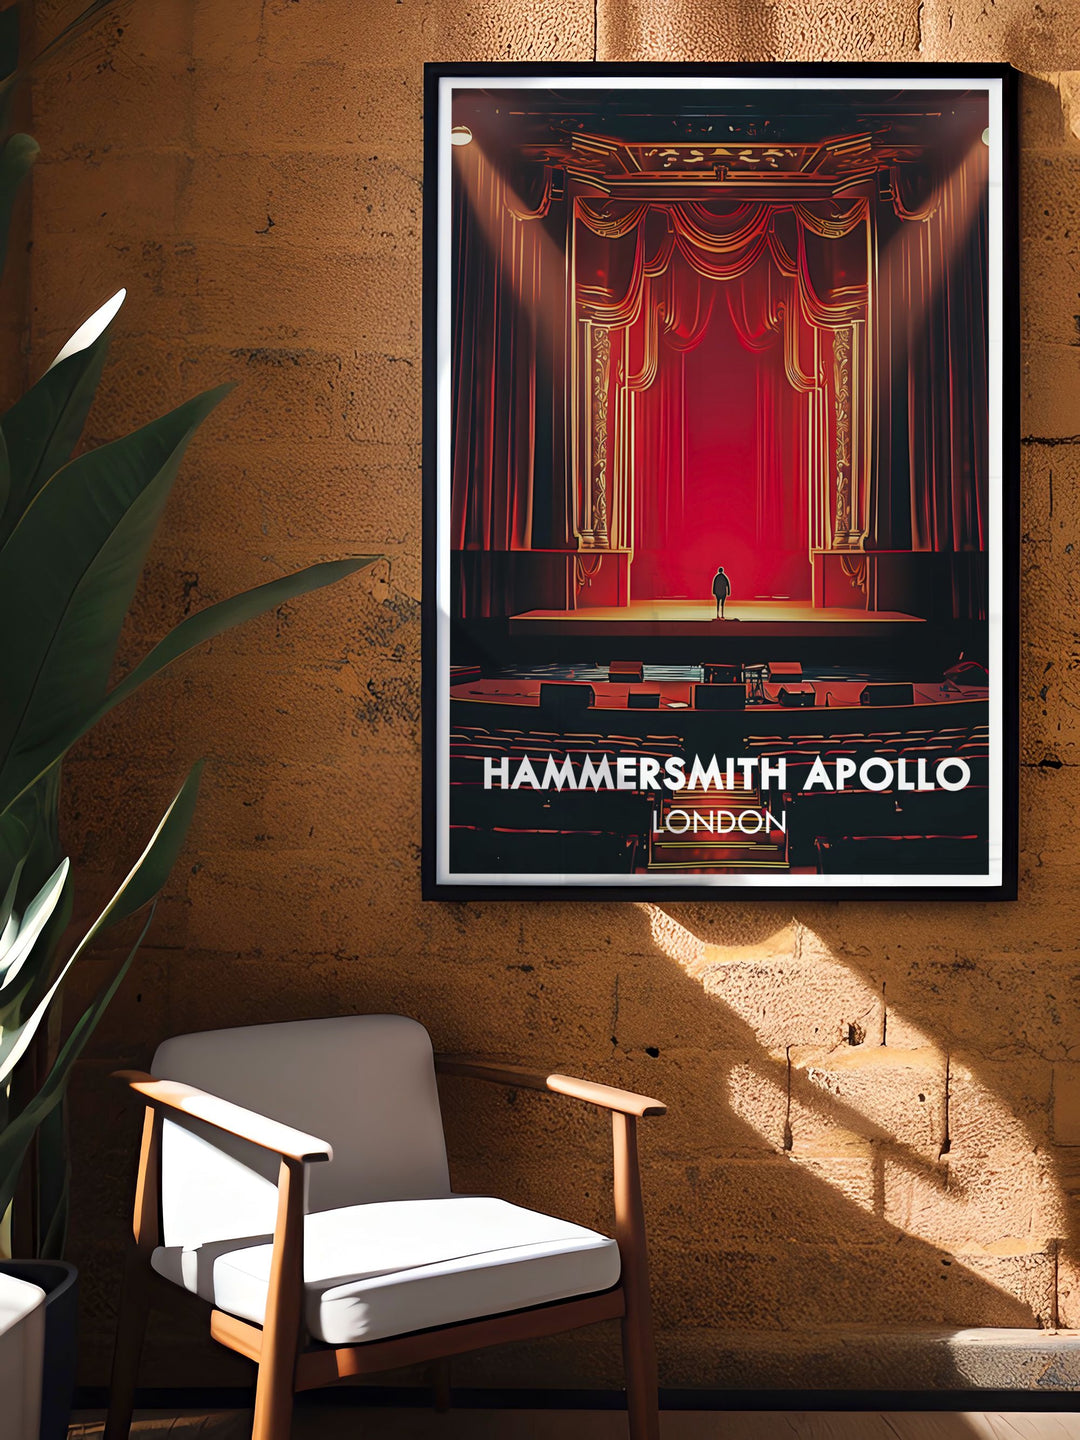 This detailed illustration captures the vibrant stage of Hammersmith Apollo, highlighting the venues role in Londons entertainment scene and architectural beauty.